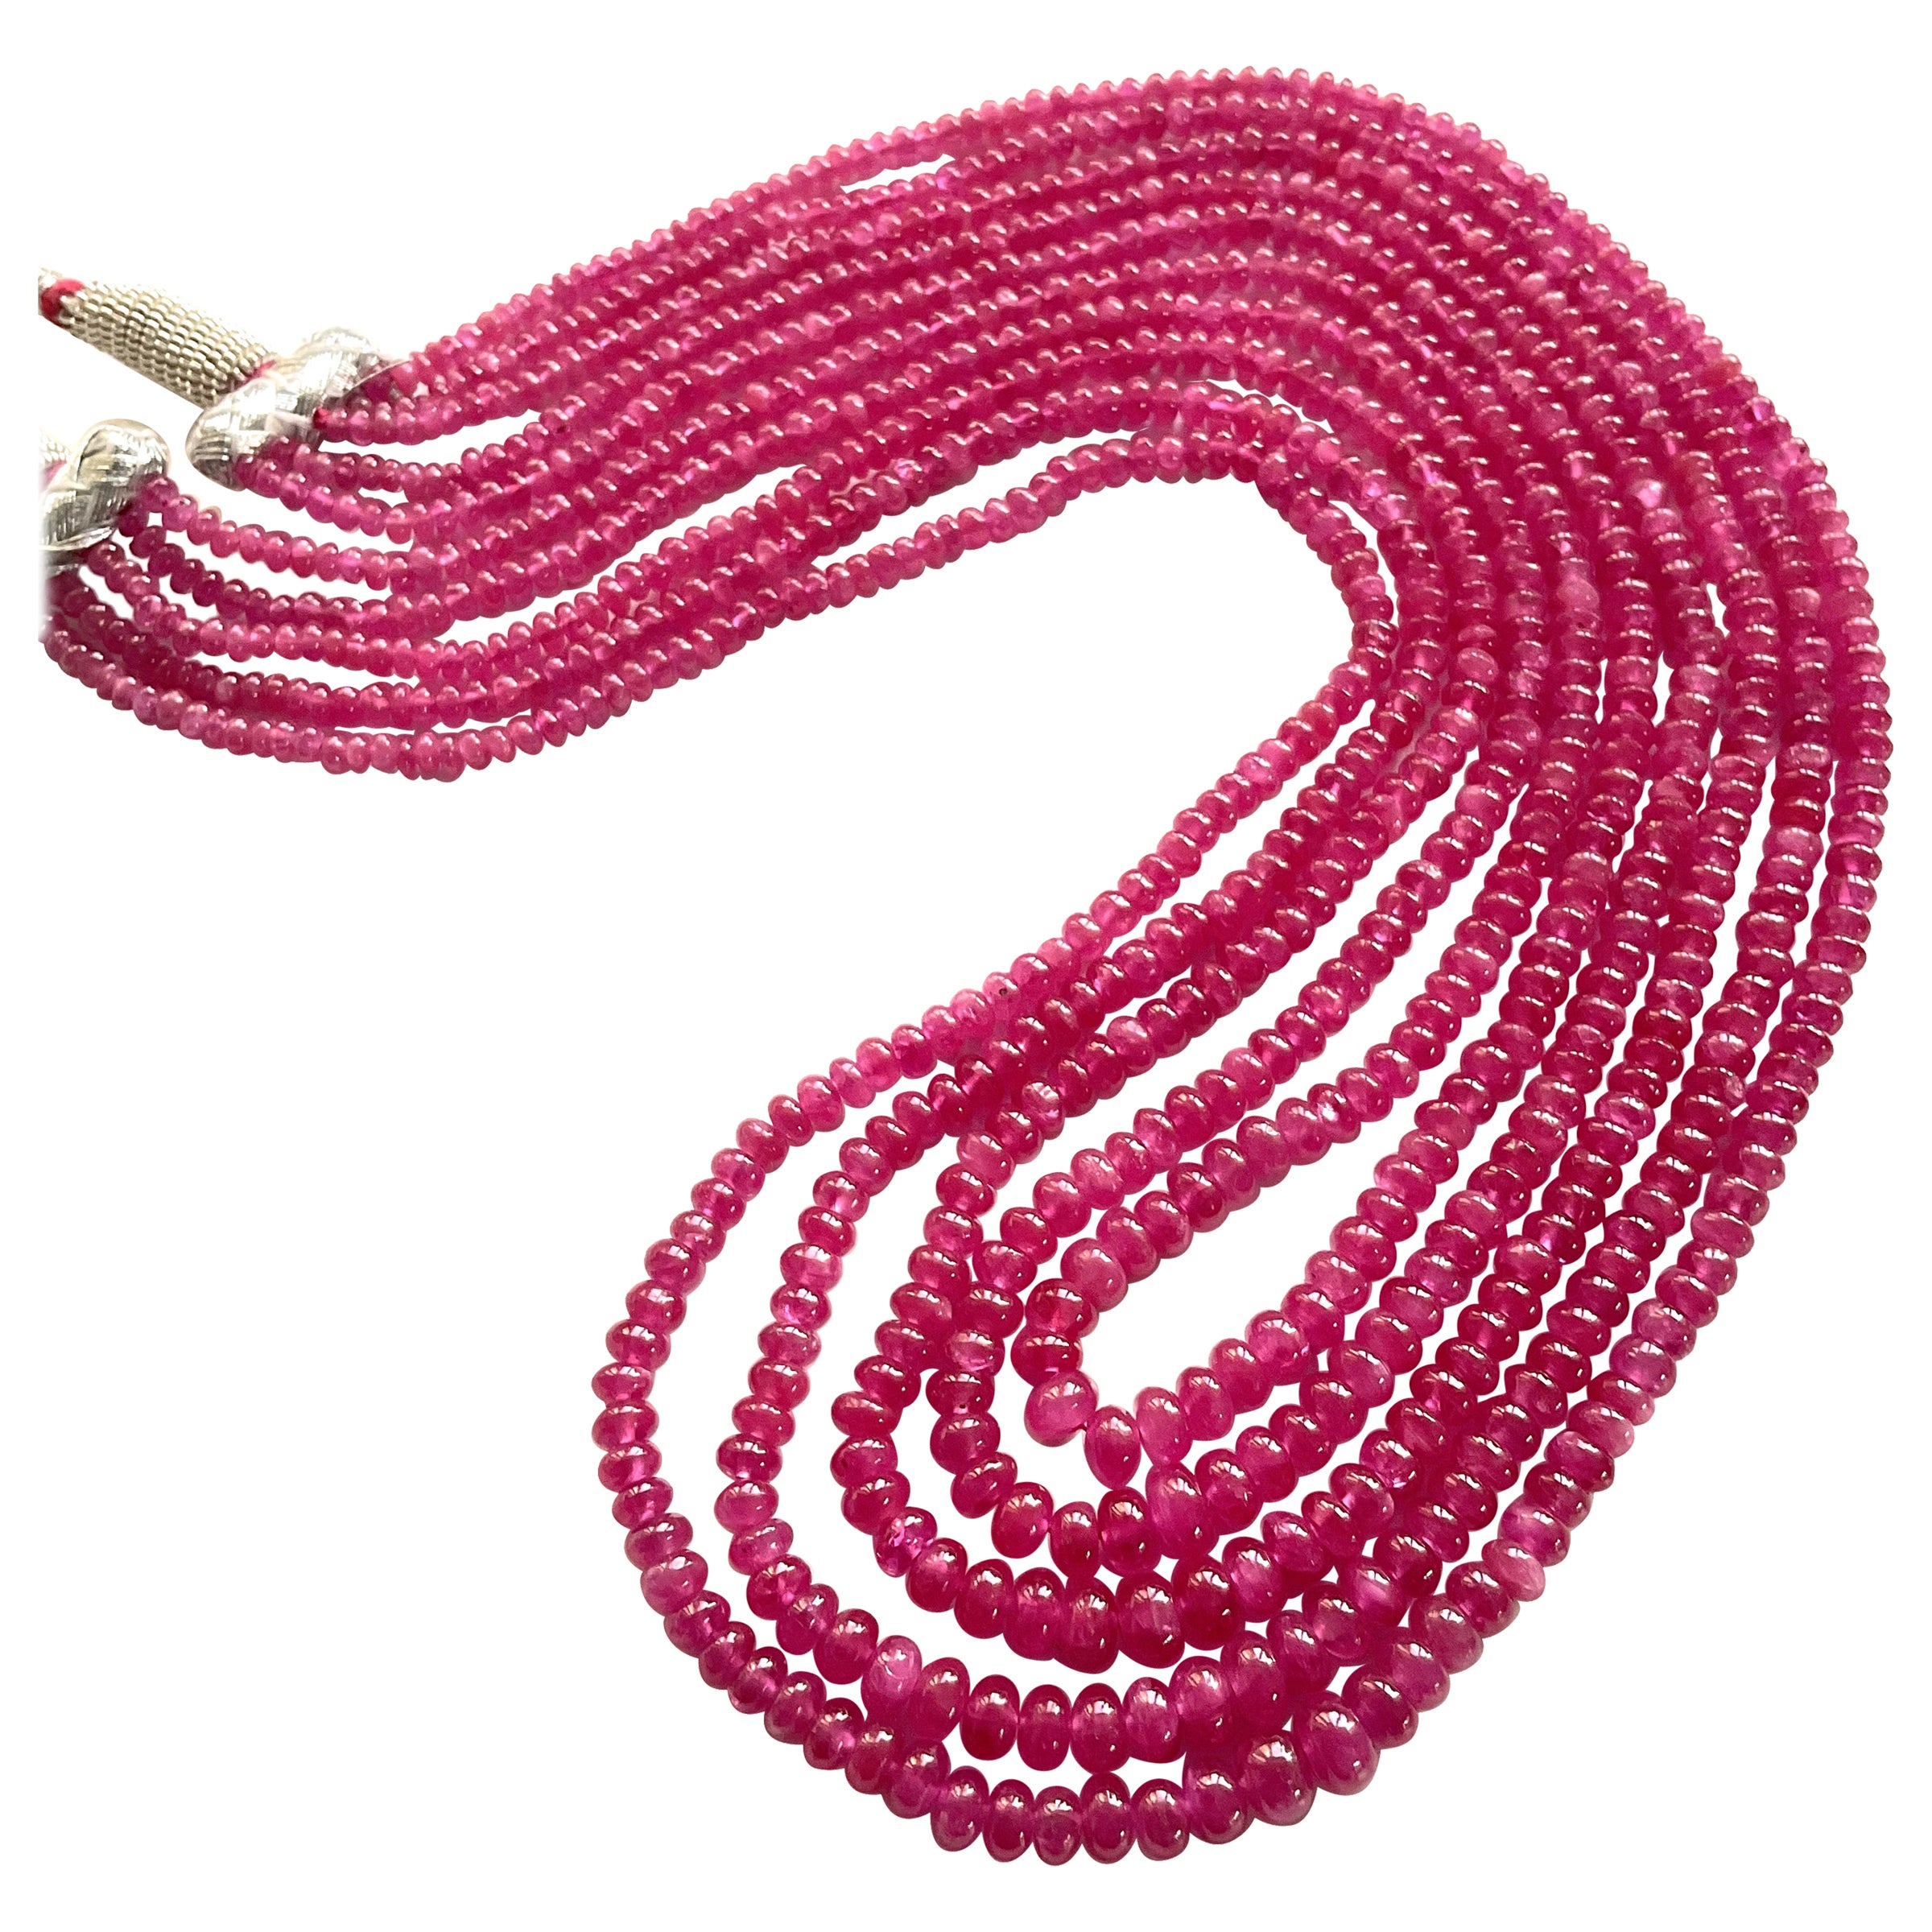 306.45 Carats Johnson Ruby Plain Beaded Necklace Top Quality Natural Gemstone For Sale